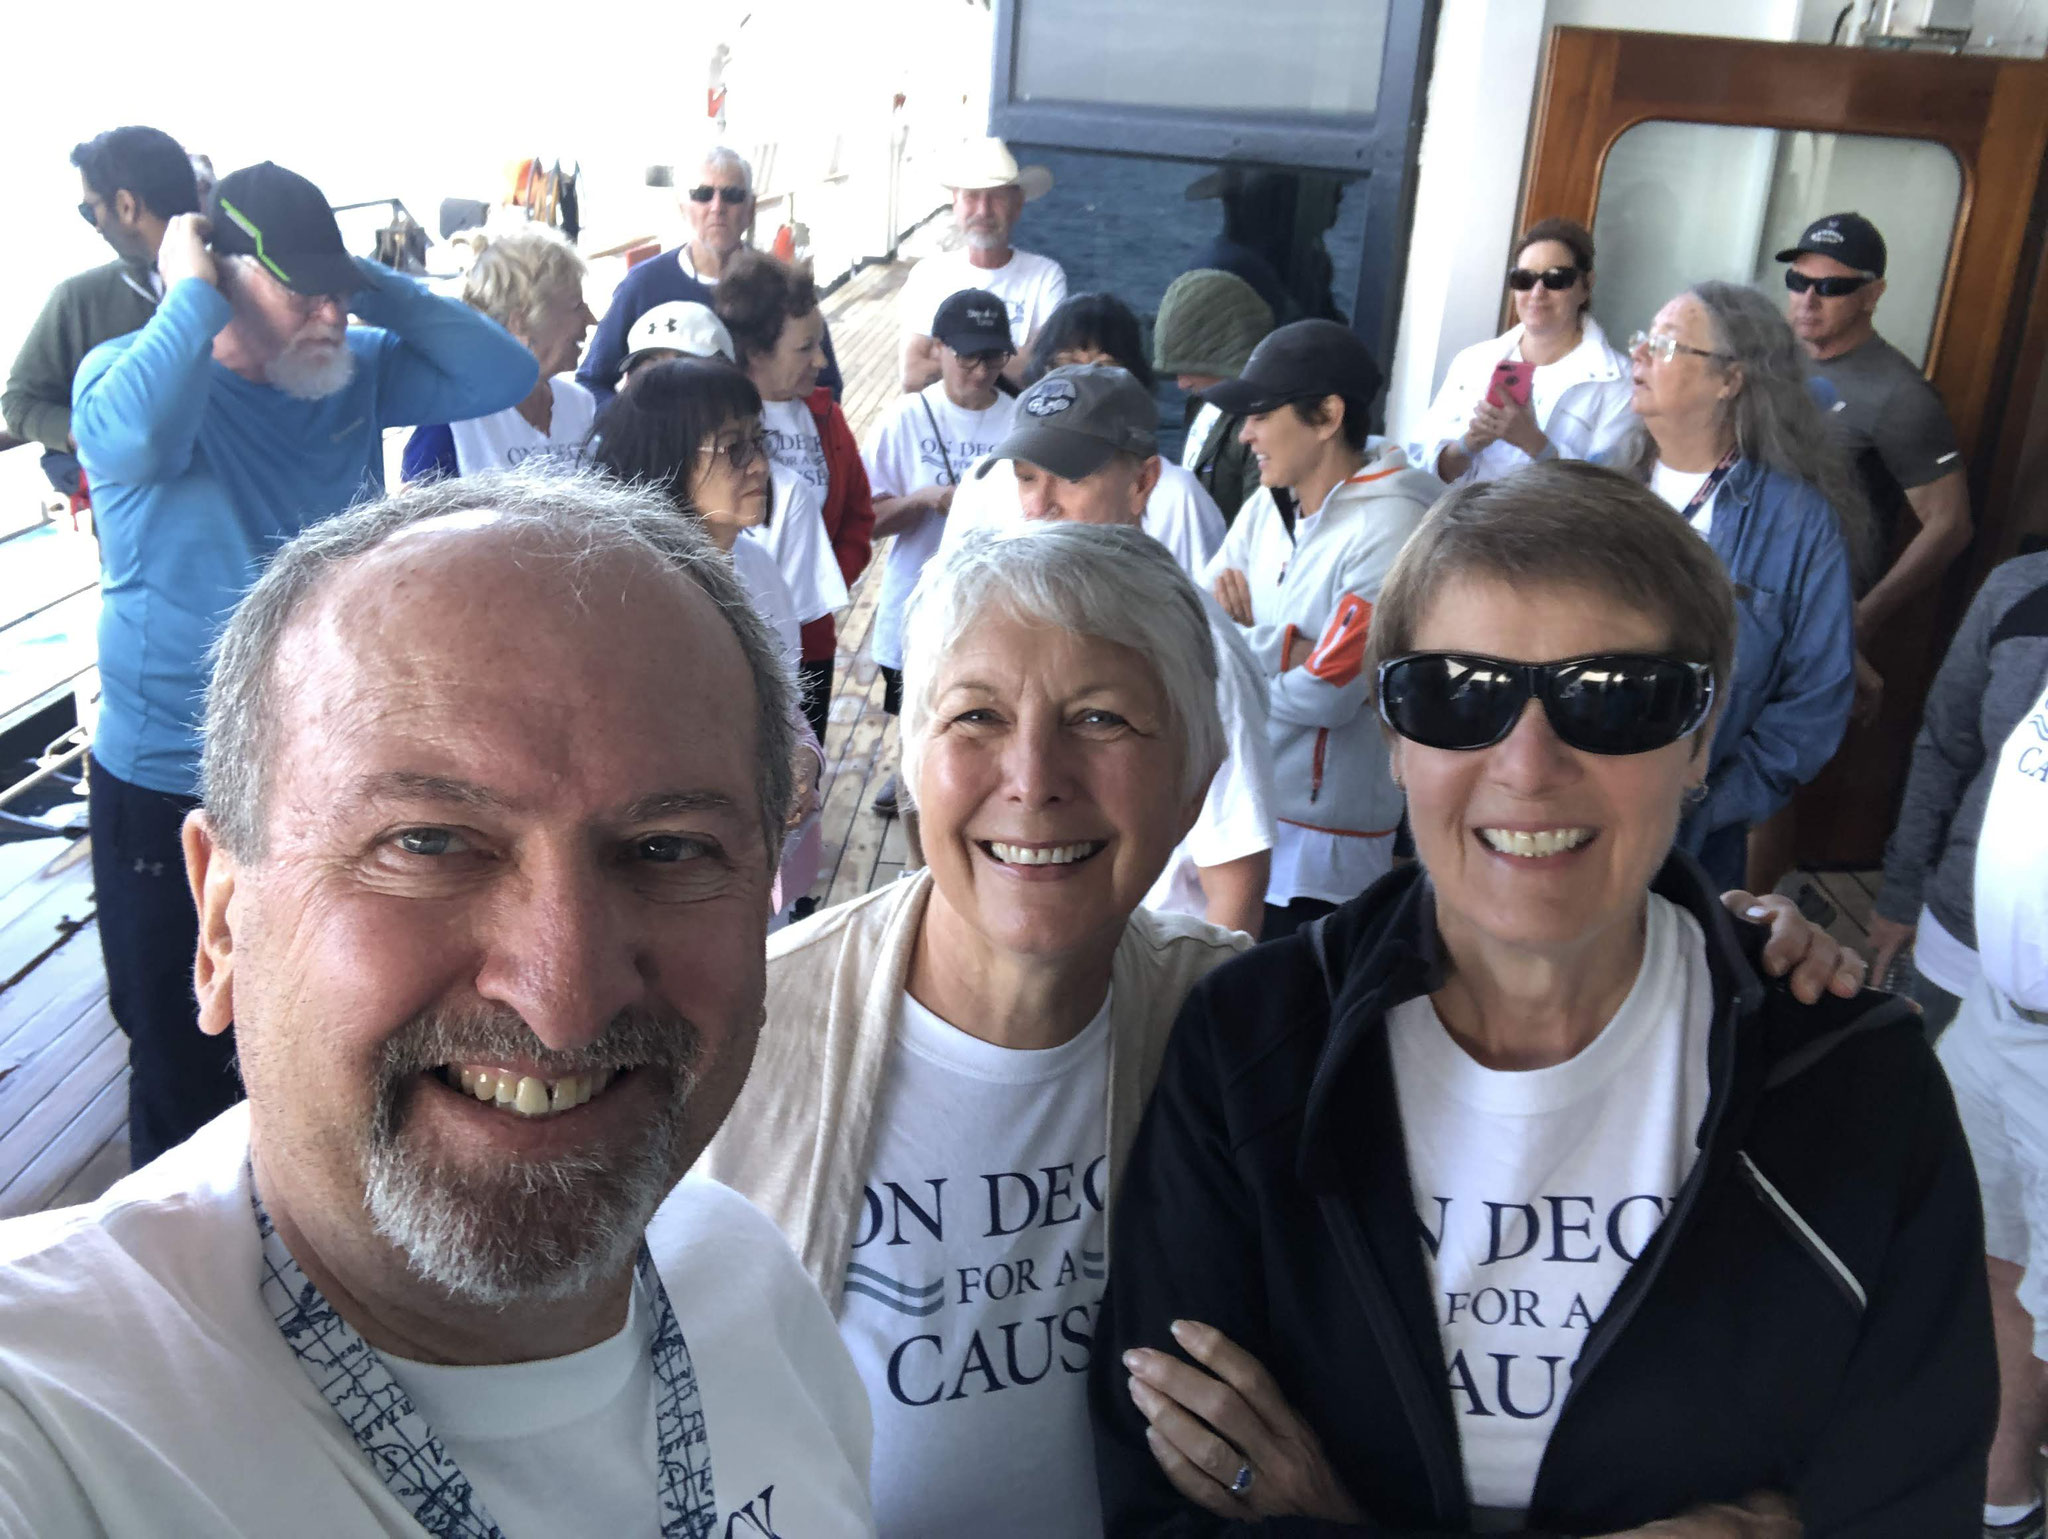 The 3 of us did the Walk the Deck for a Cause.